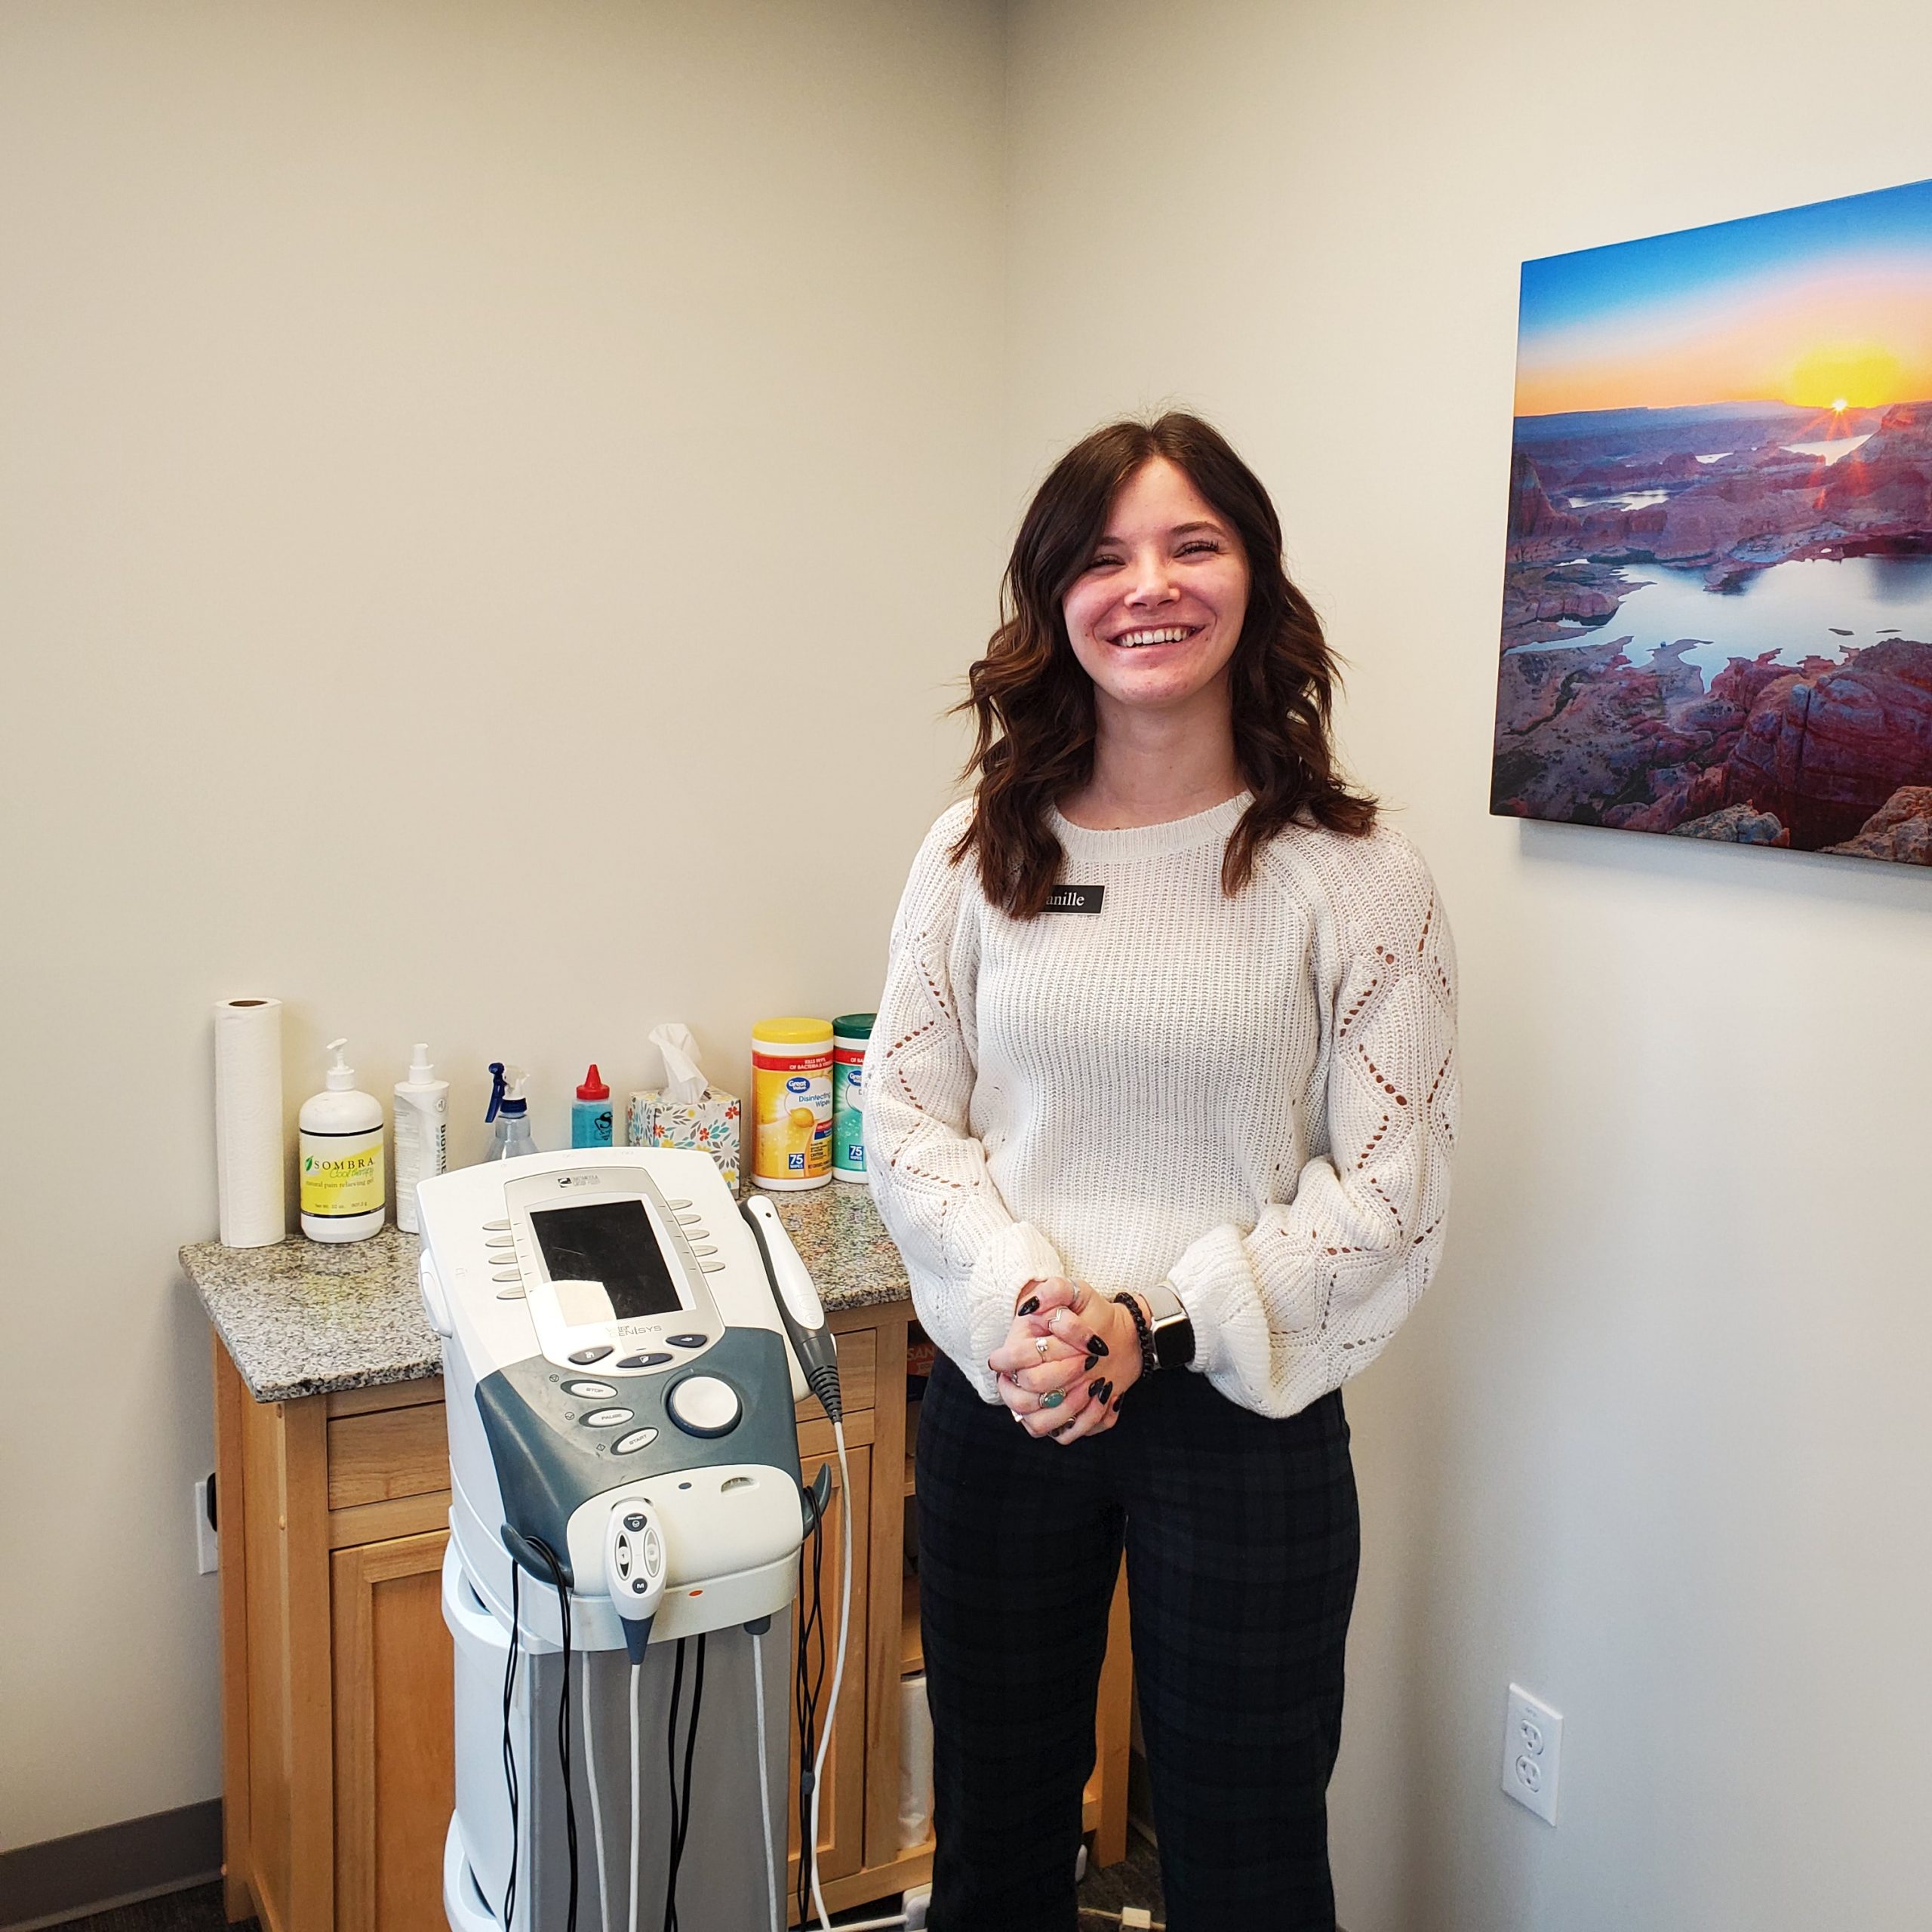 Tanille, our chiropractic assistant